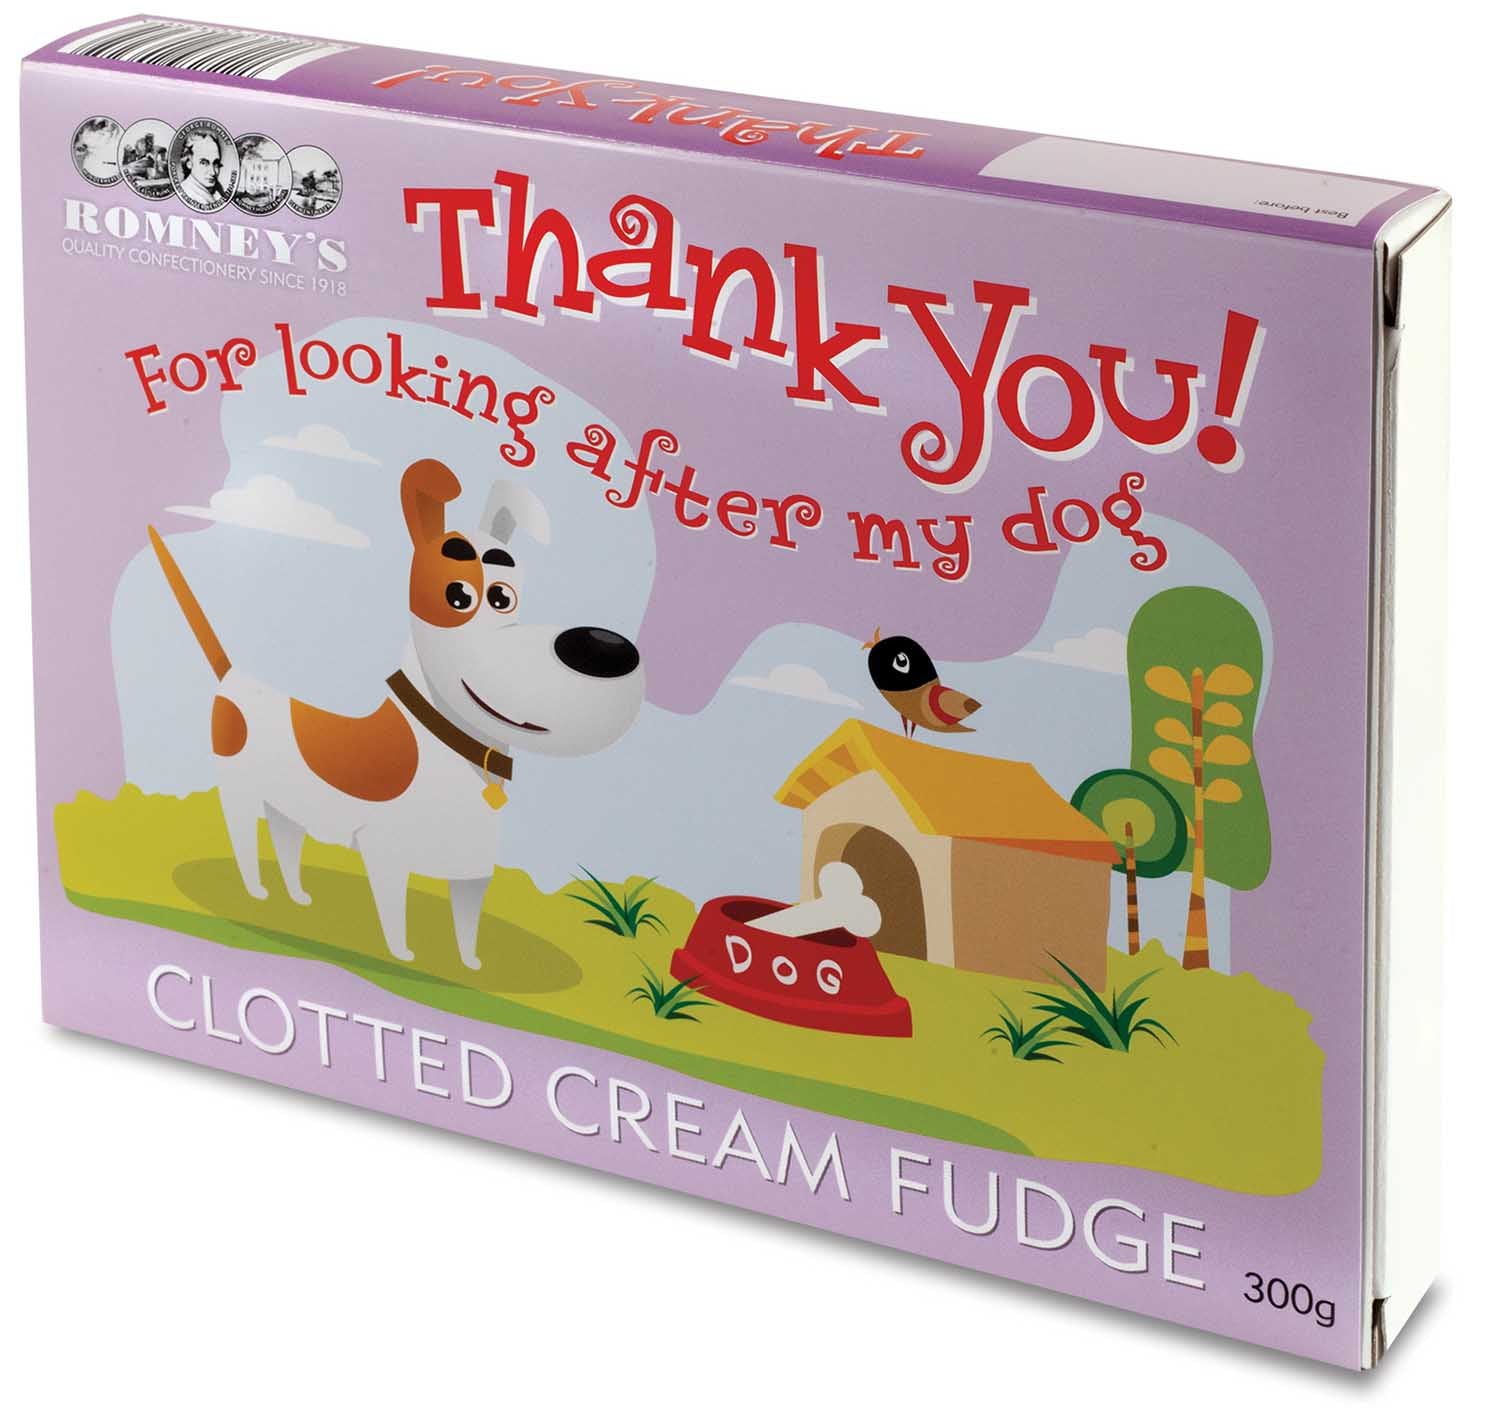 A pink rectangular box featuring a cartoon grass landscape and a dog. The words 'Thank you! For looking after my dog' are written in a red font. The box contains 300g of clotted cream fudge.